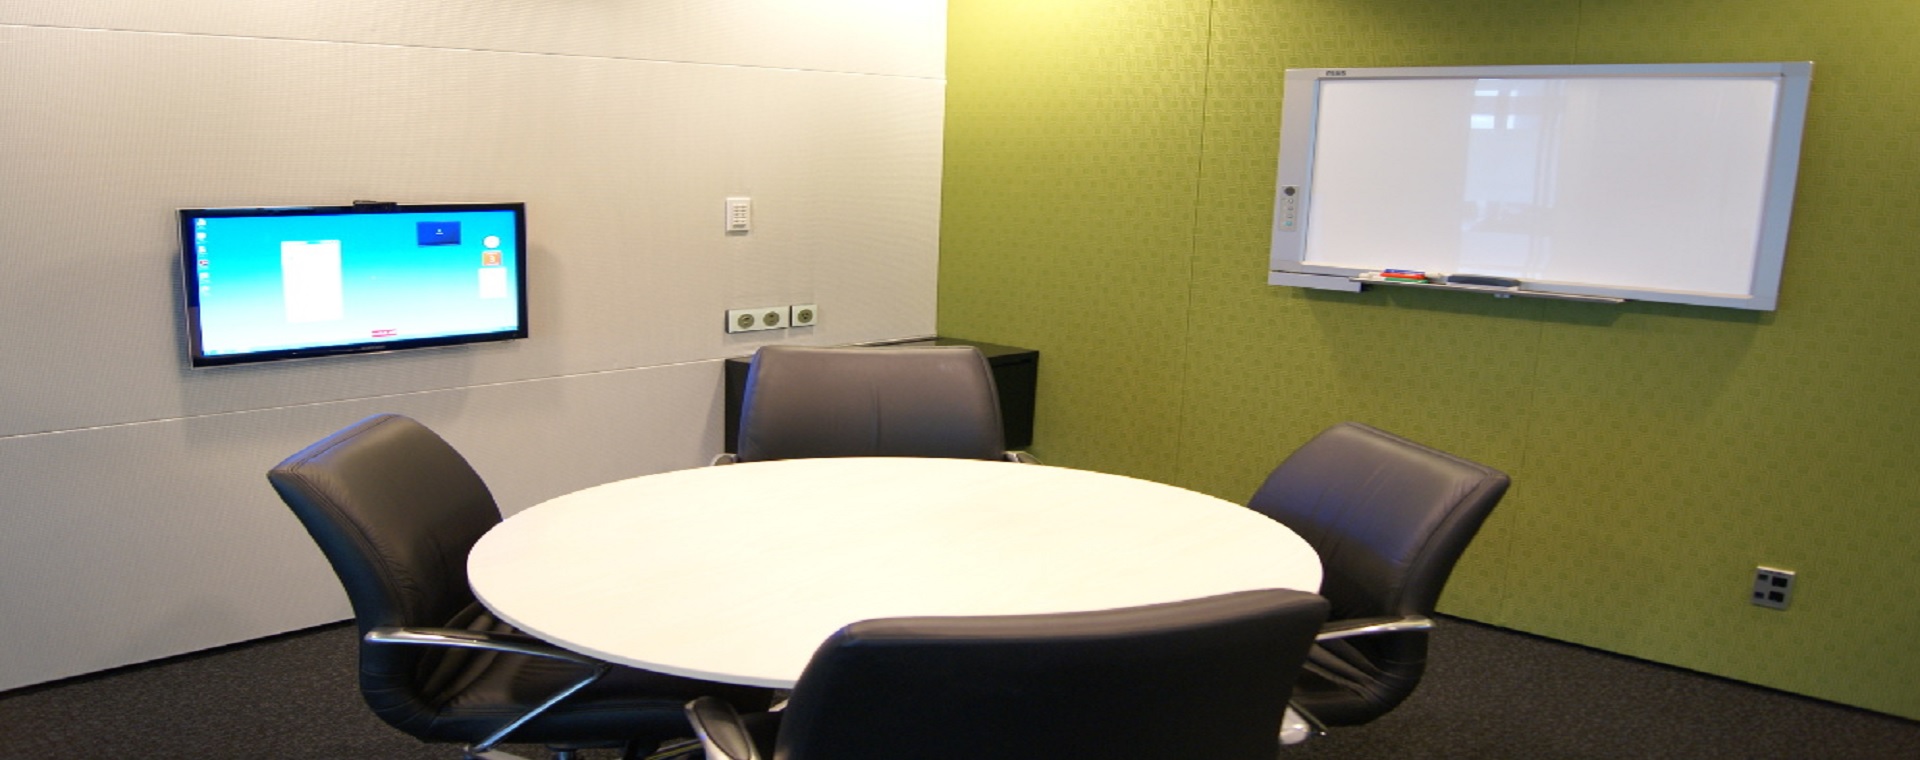 BECA meeting room with interactive whiteboard and display screen